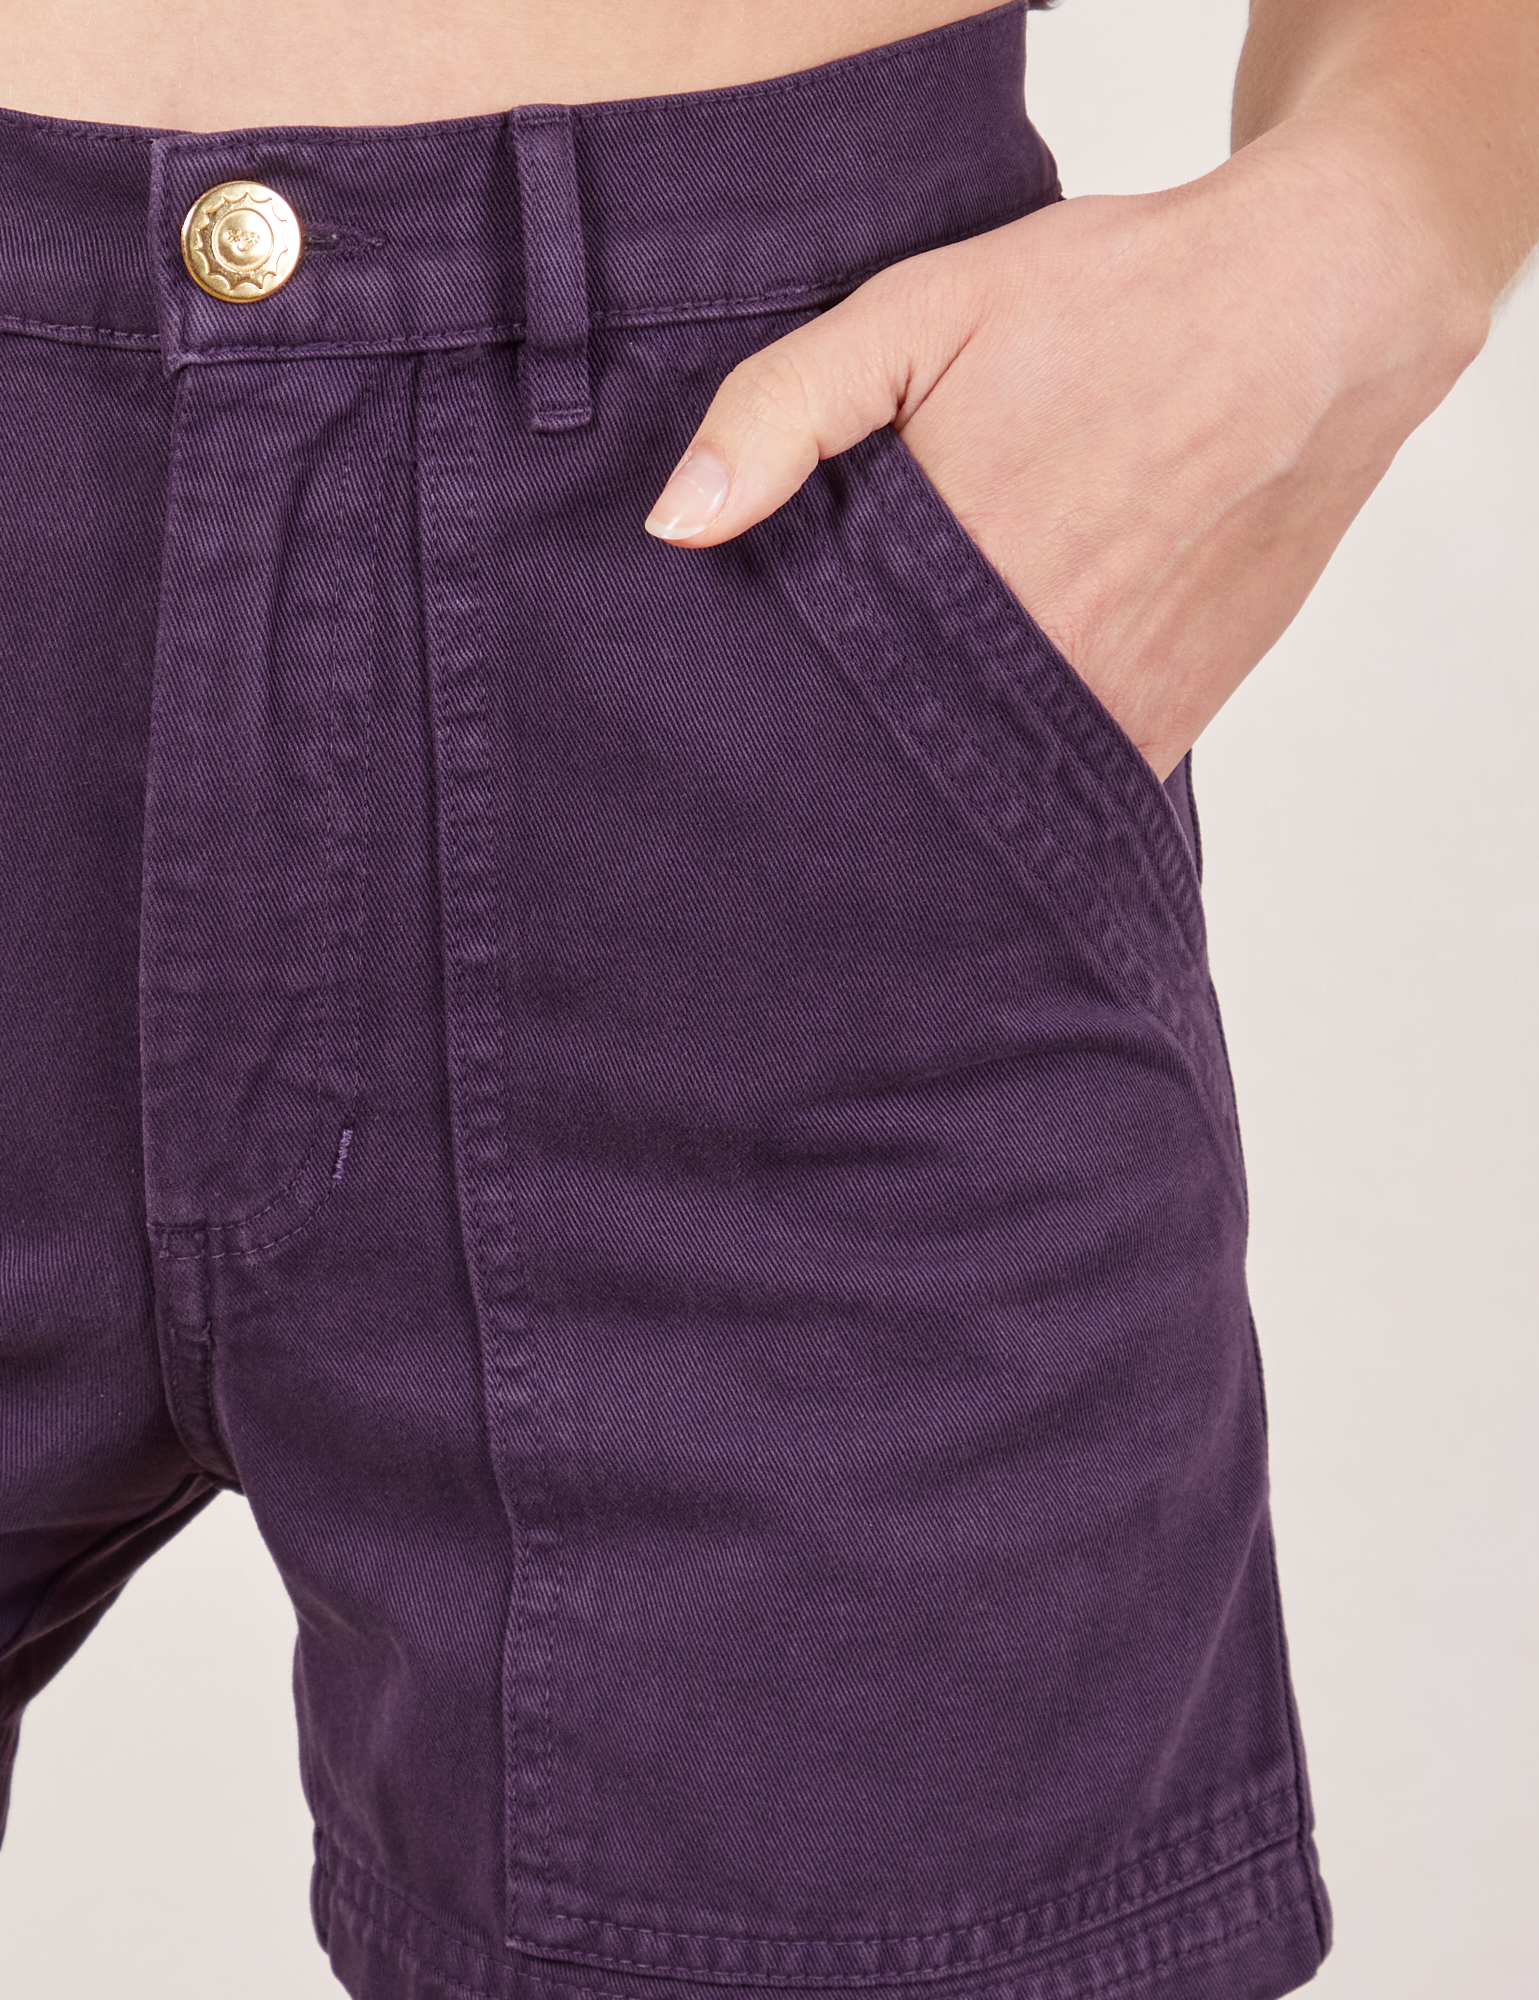 Classic Work Shorts in Nebula Purple front pocket close up. Madeline has her hand in the pocket.